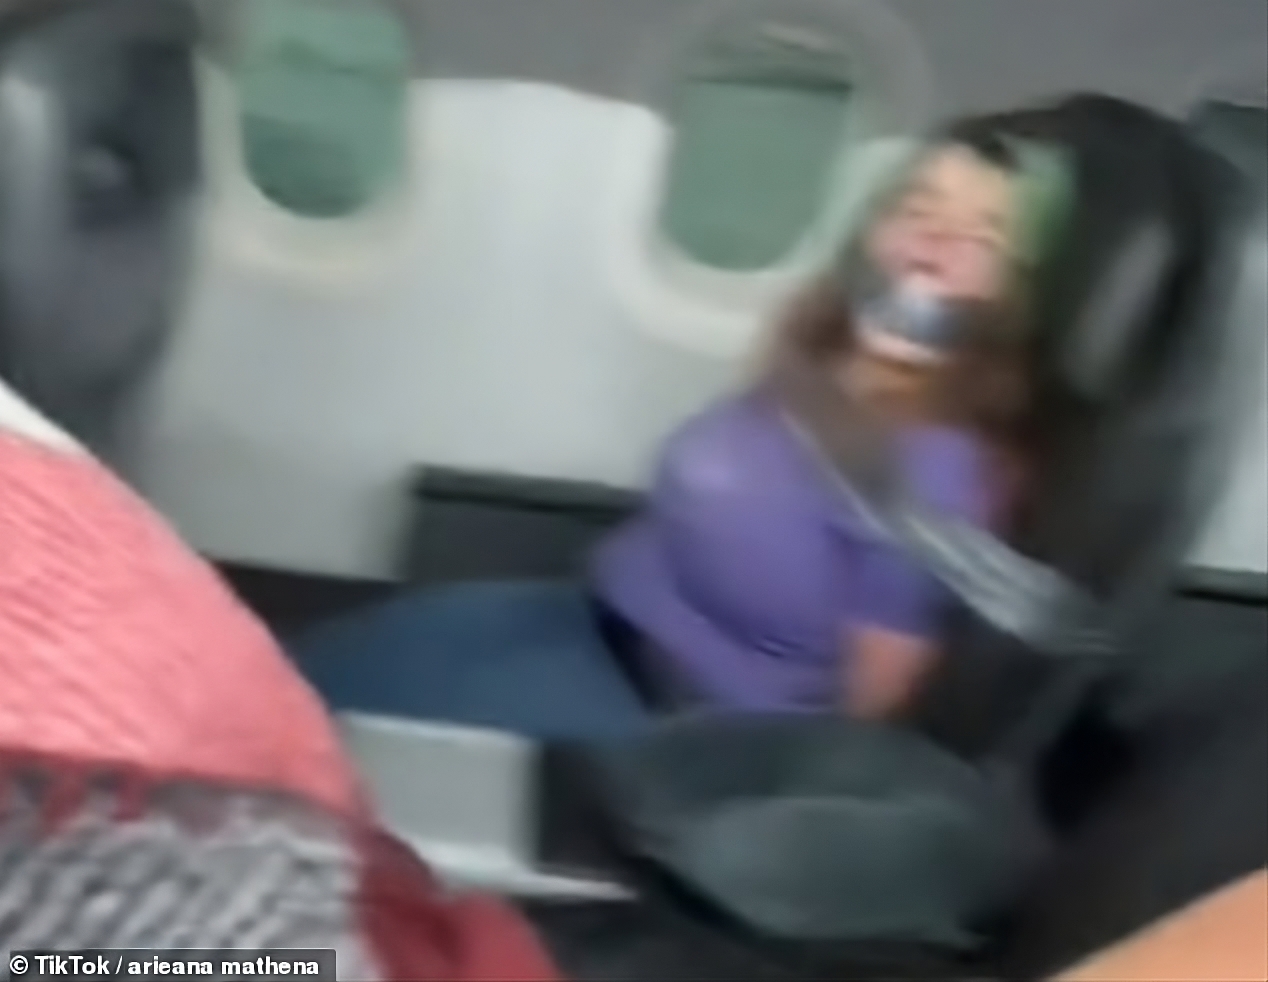 American Airlines Passenger Sued For $81,950 After Being Duct Taped To Seat